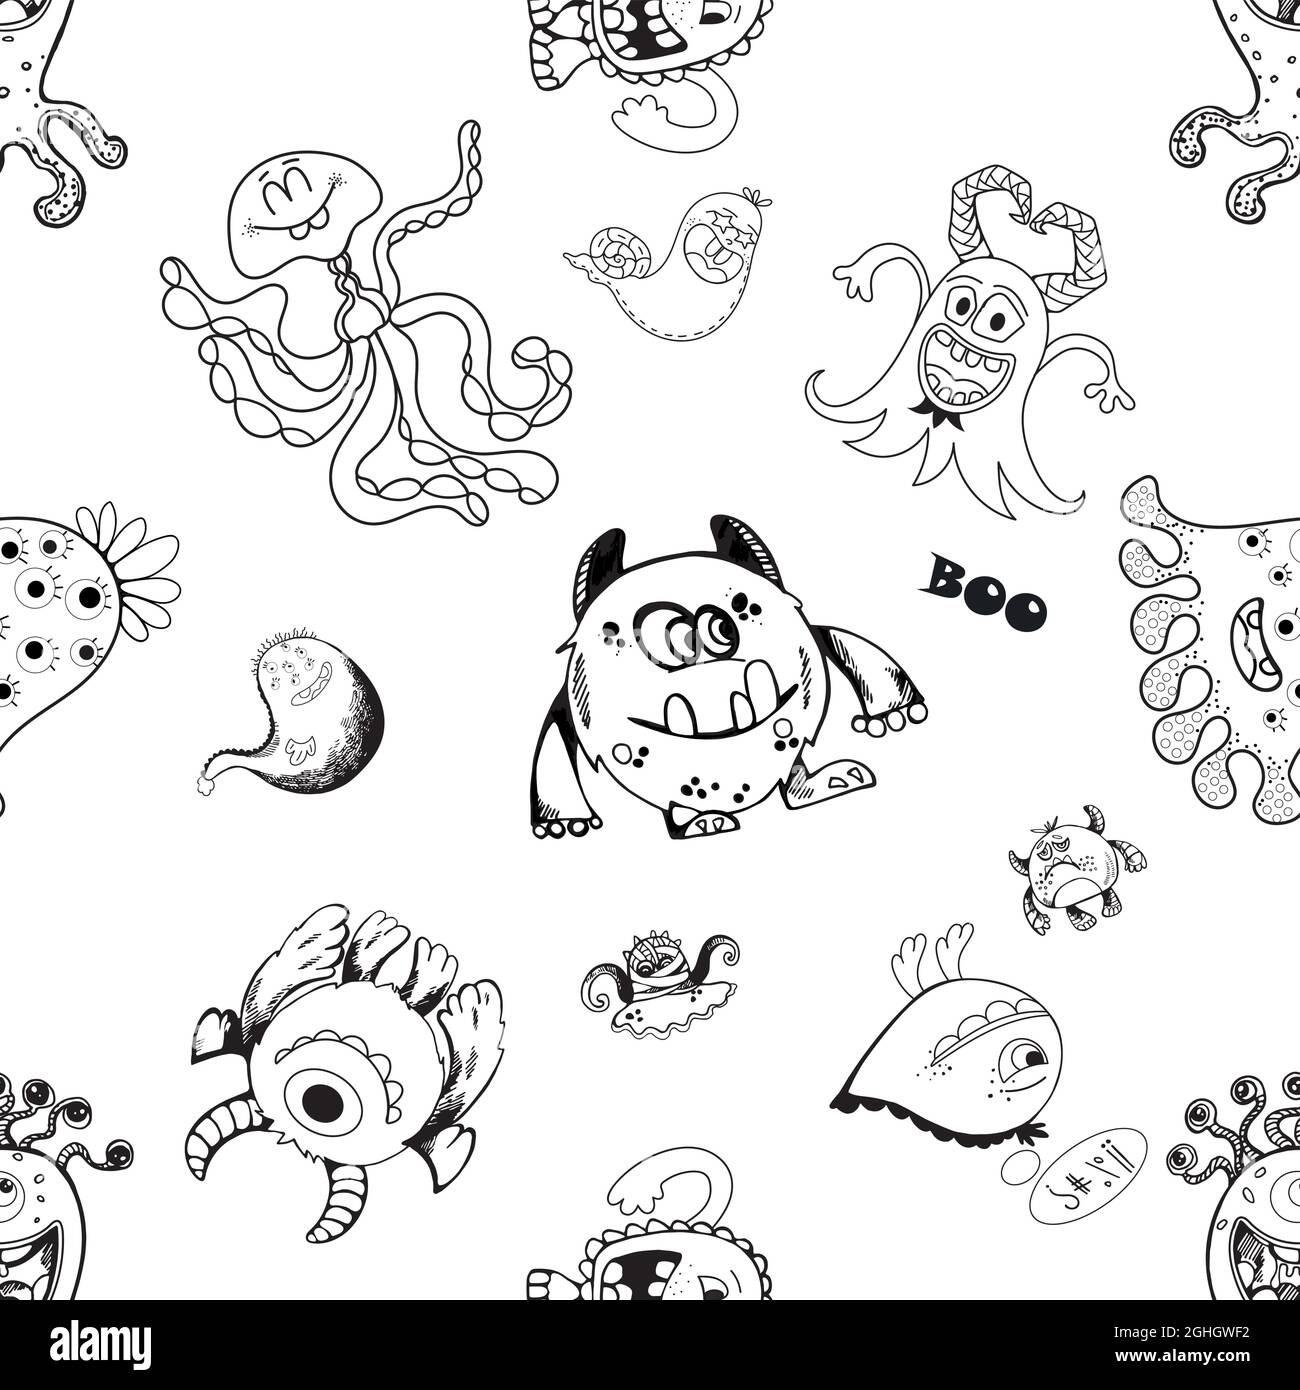 Seamless pattern of hand drawn sketch style fictional little monsters isolated on white background. Vector illustration. Stock Vector